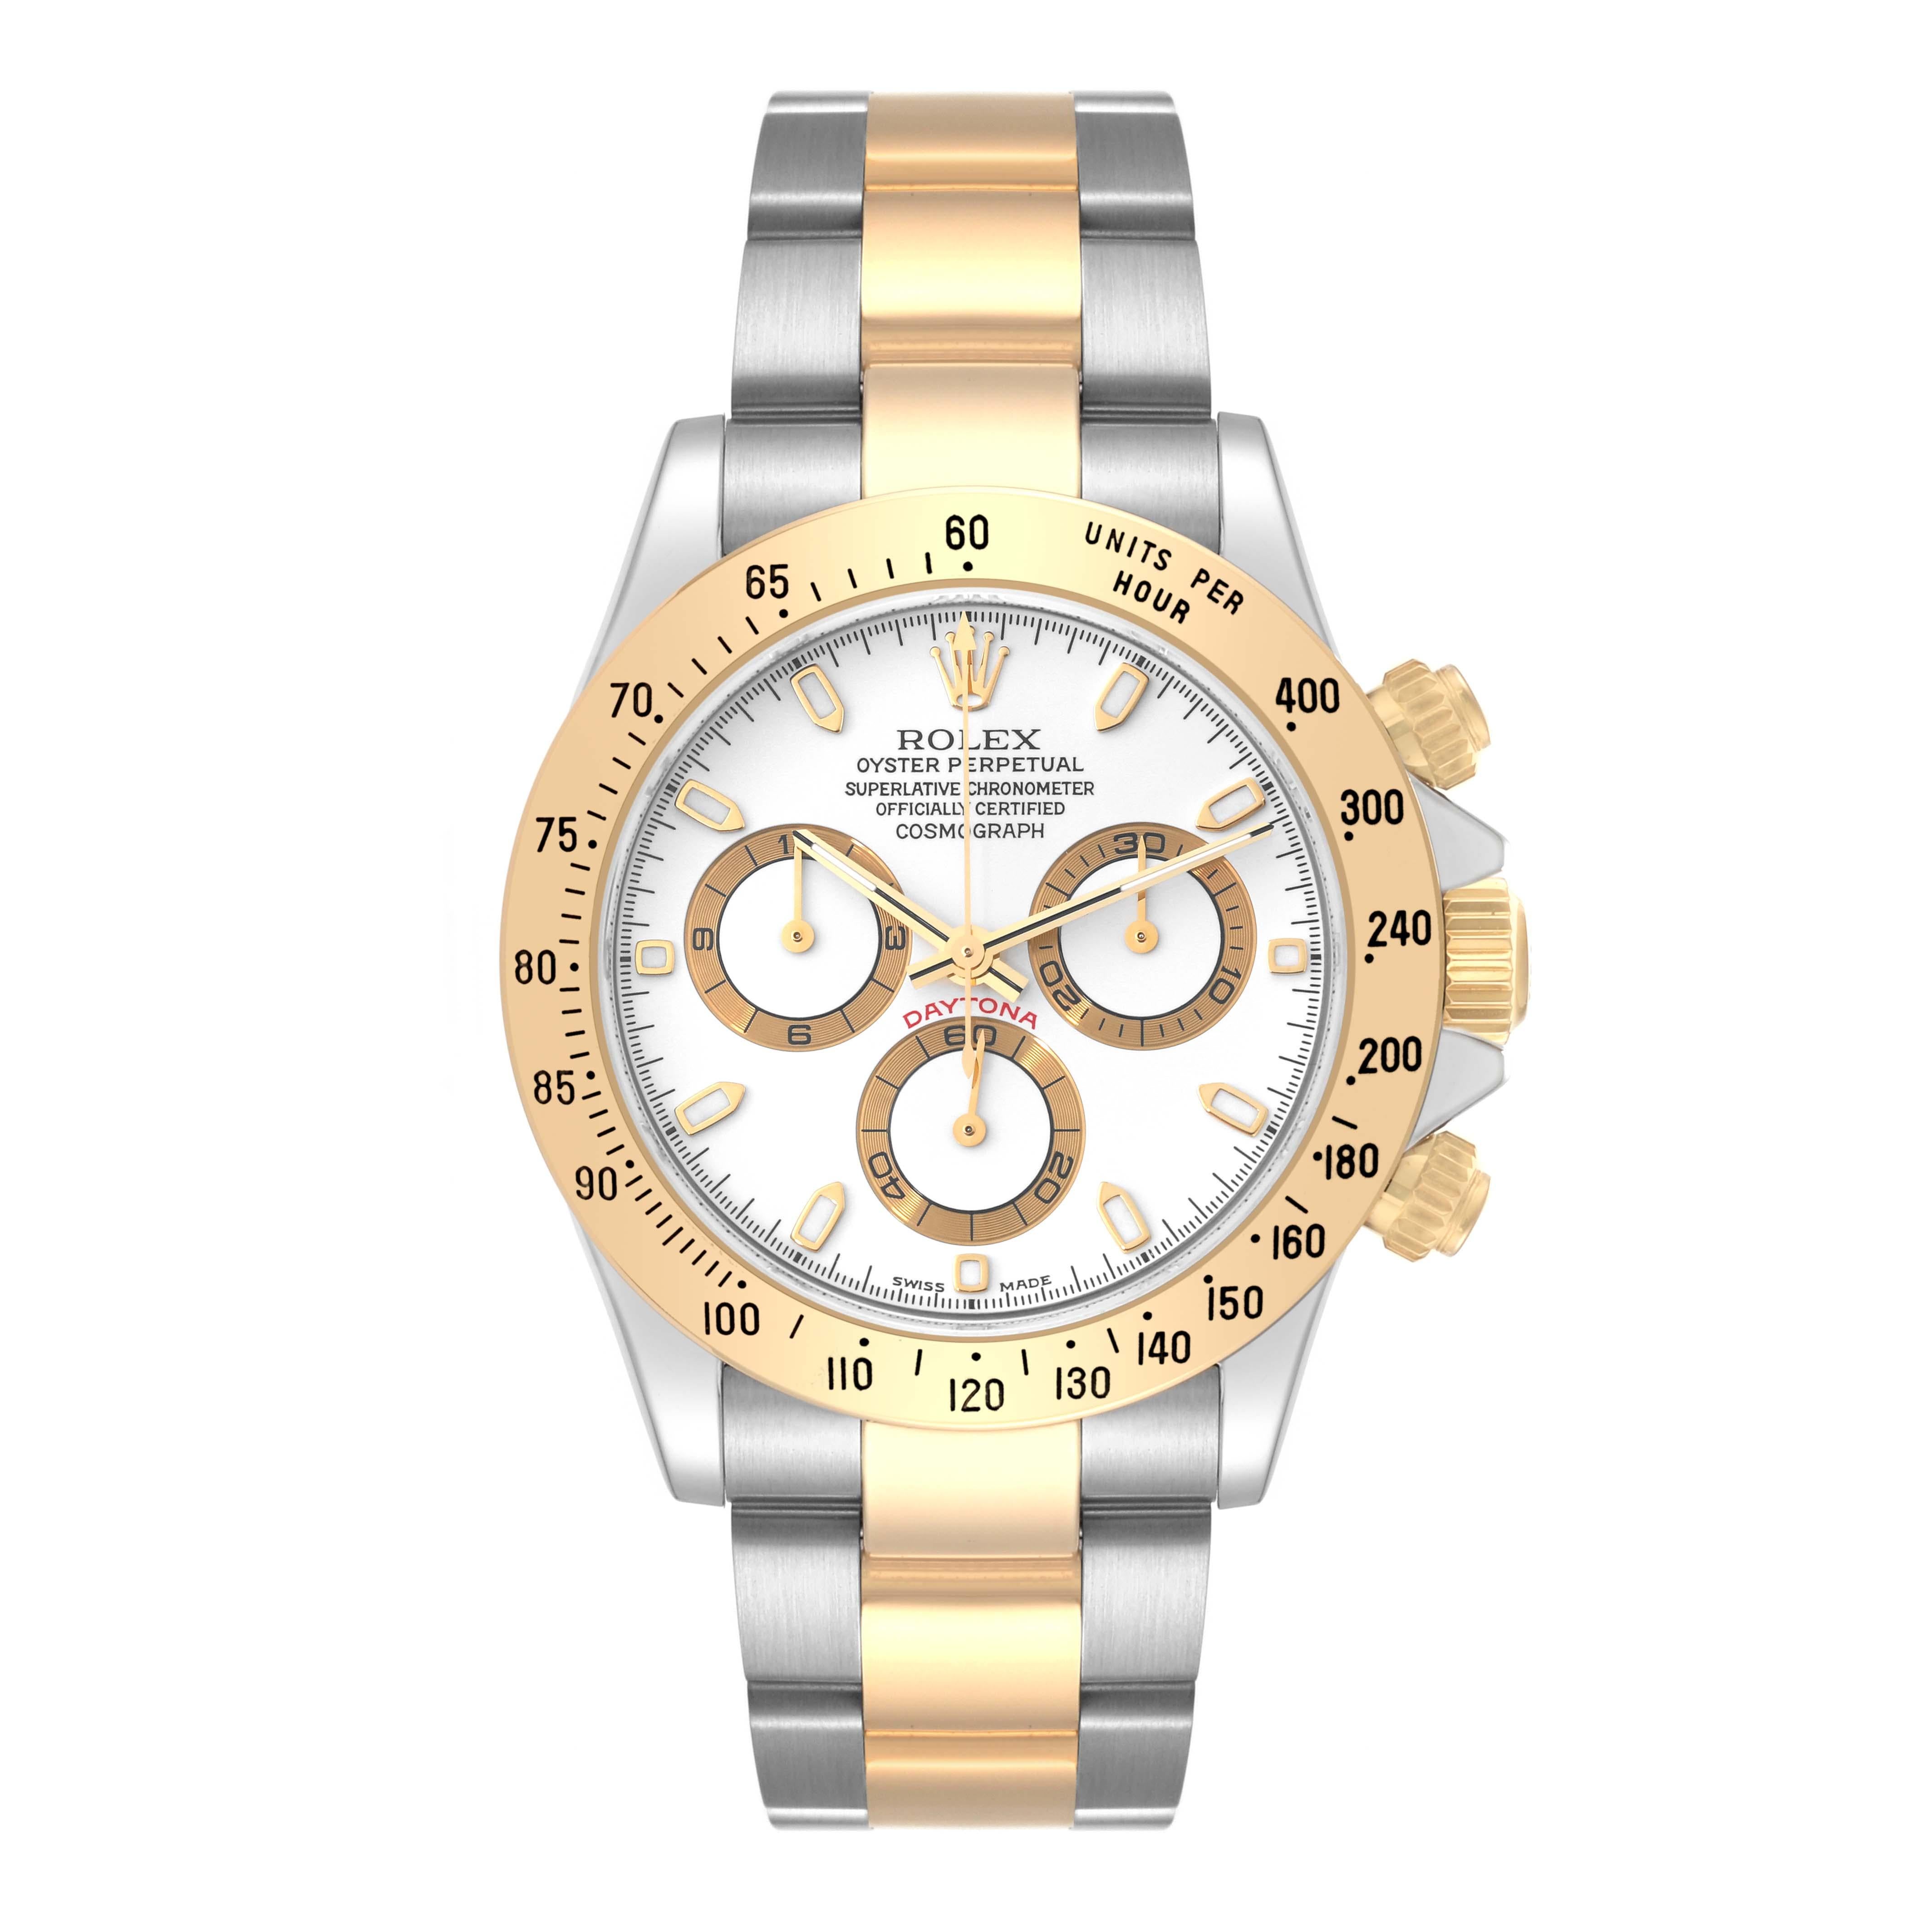 Rolex Daytona Steel Yellow Gold White Dial Mens Watch 116523 Box Papers. Officially certified chronometer automatic self-winding movement. Rhodium-plated, oeil-de-perdrix decoration, straight line lever escapement, monometallic balance adjusted to 5